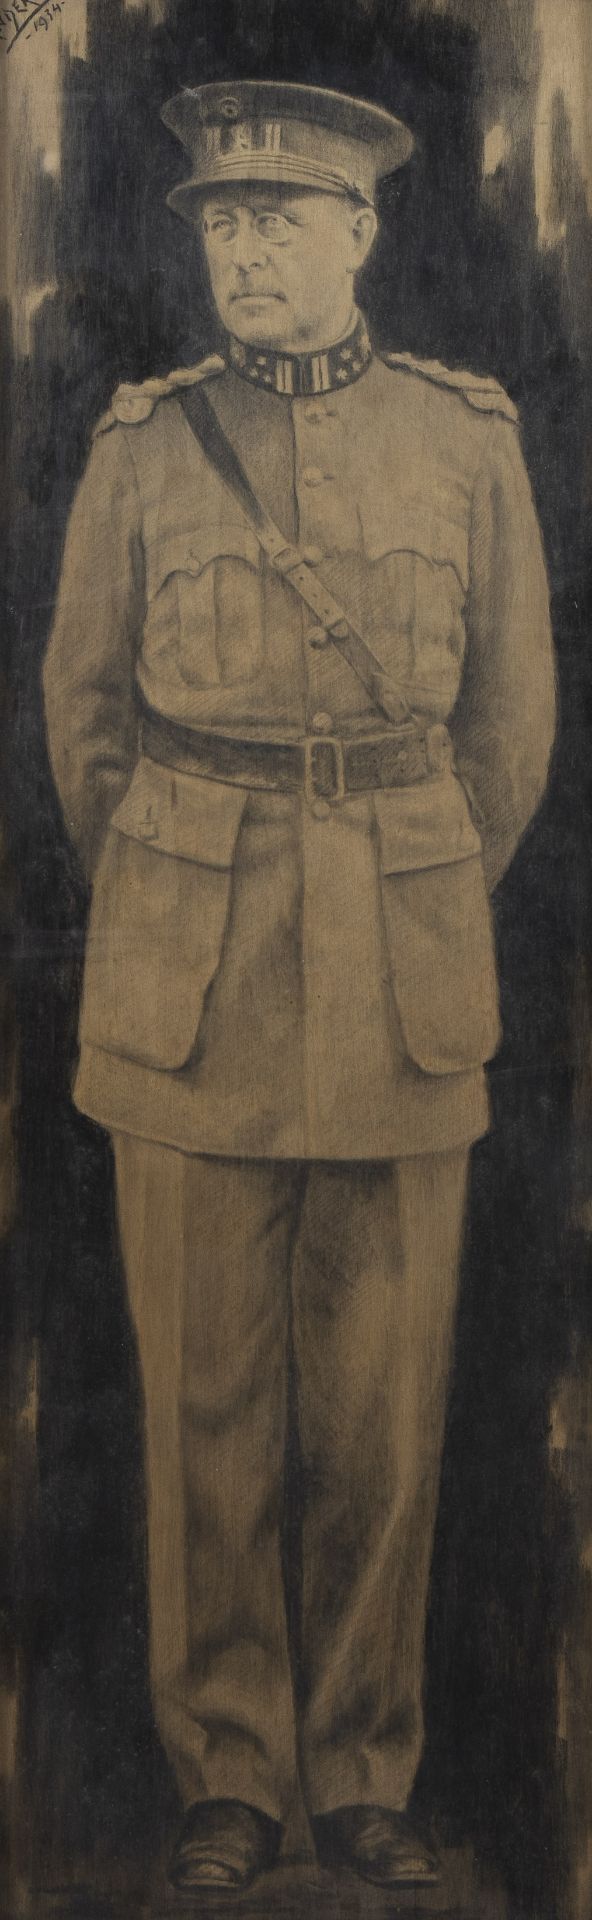 A pencil drawing of Albert I 1934 and oil on canvas Leopold 1935 - Image 2 of 8